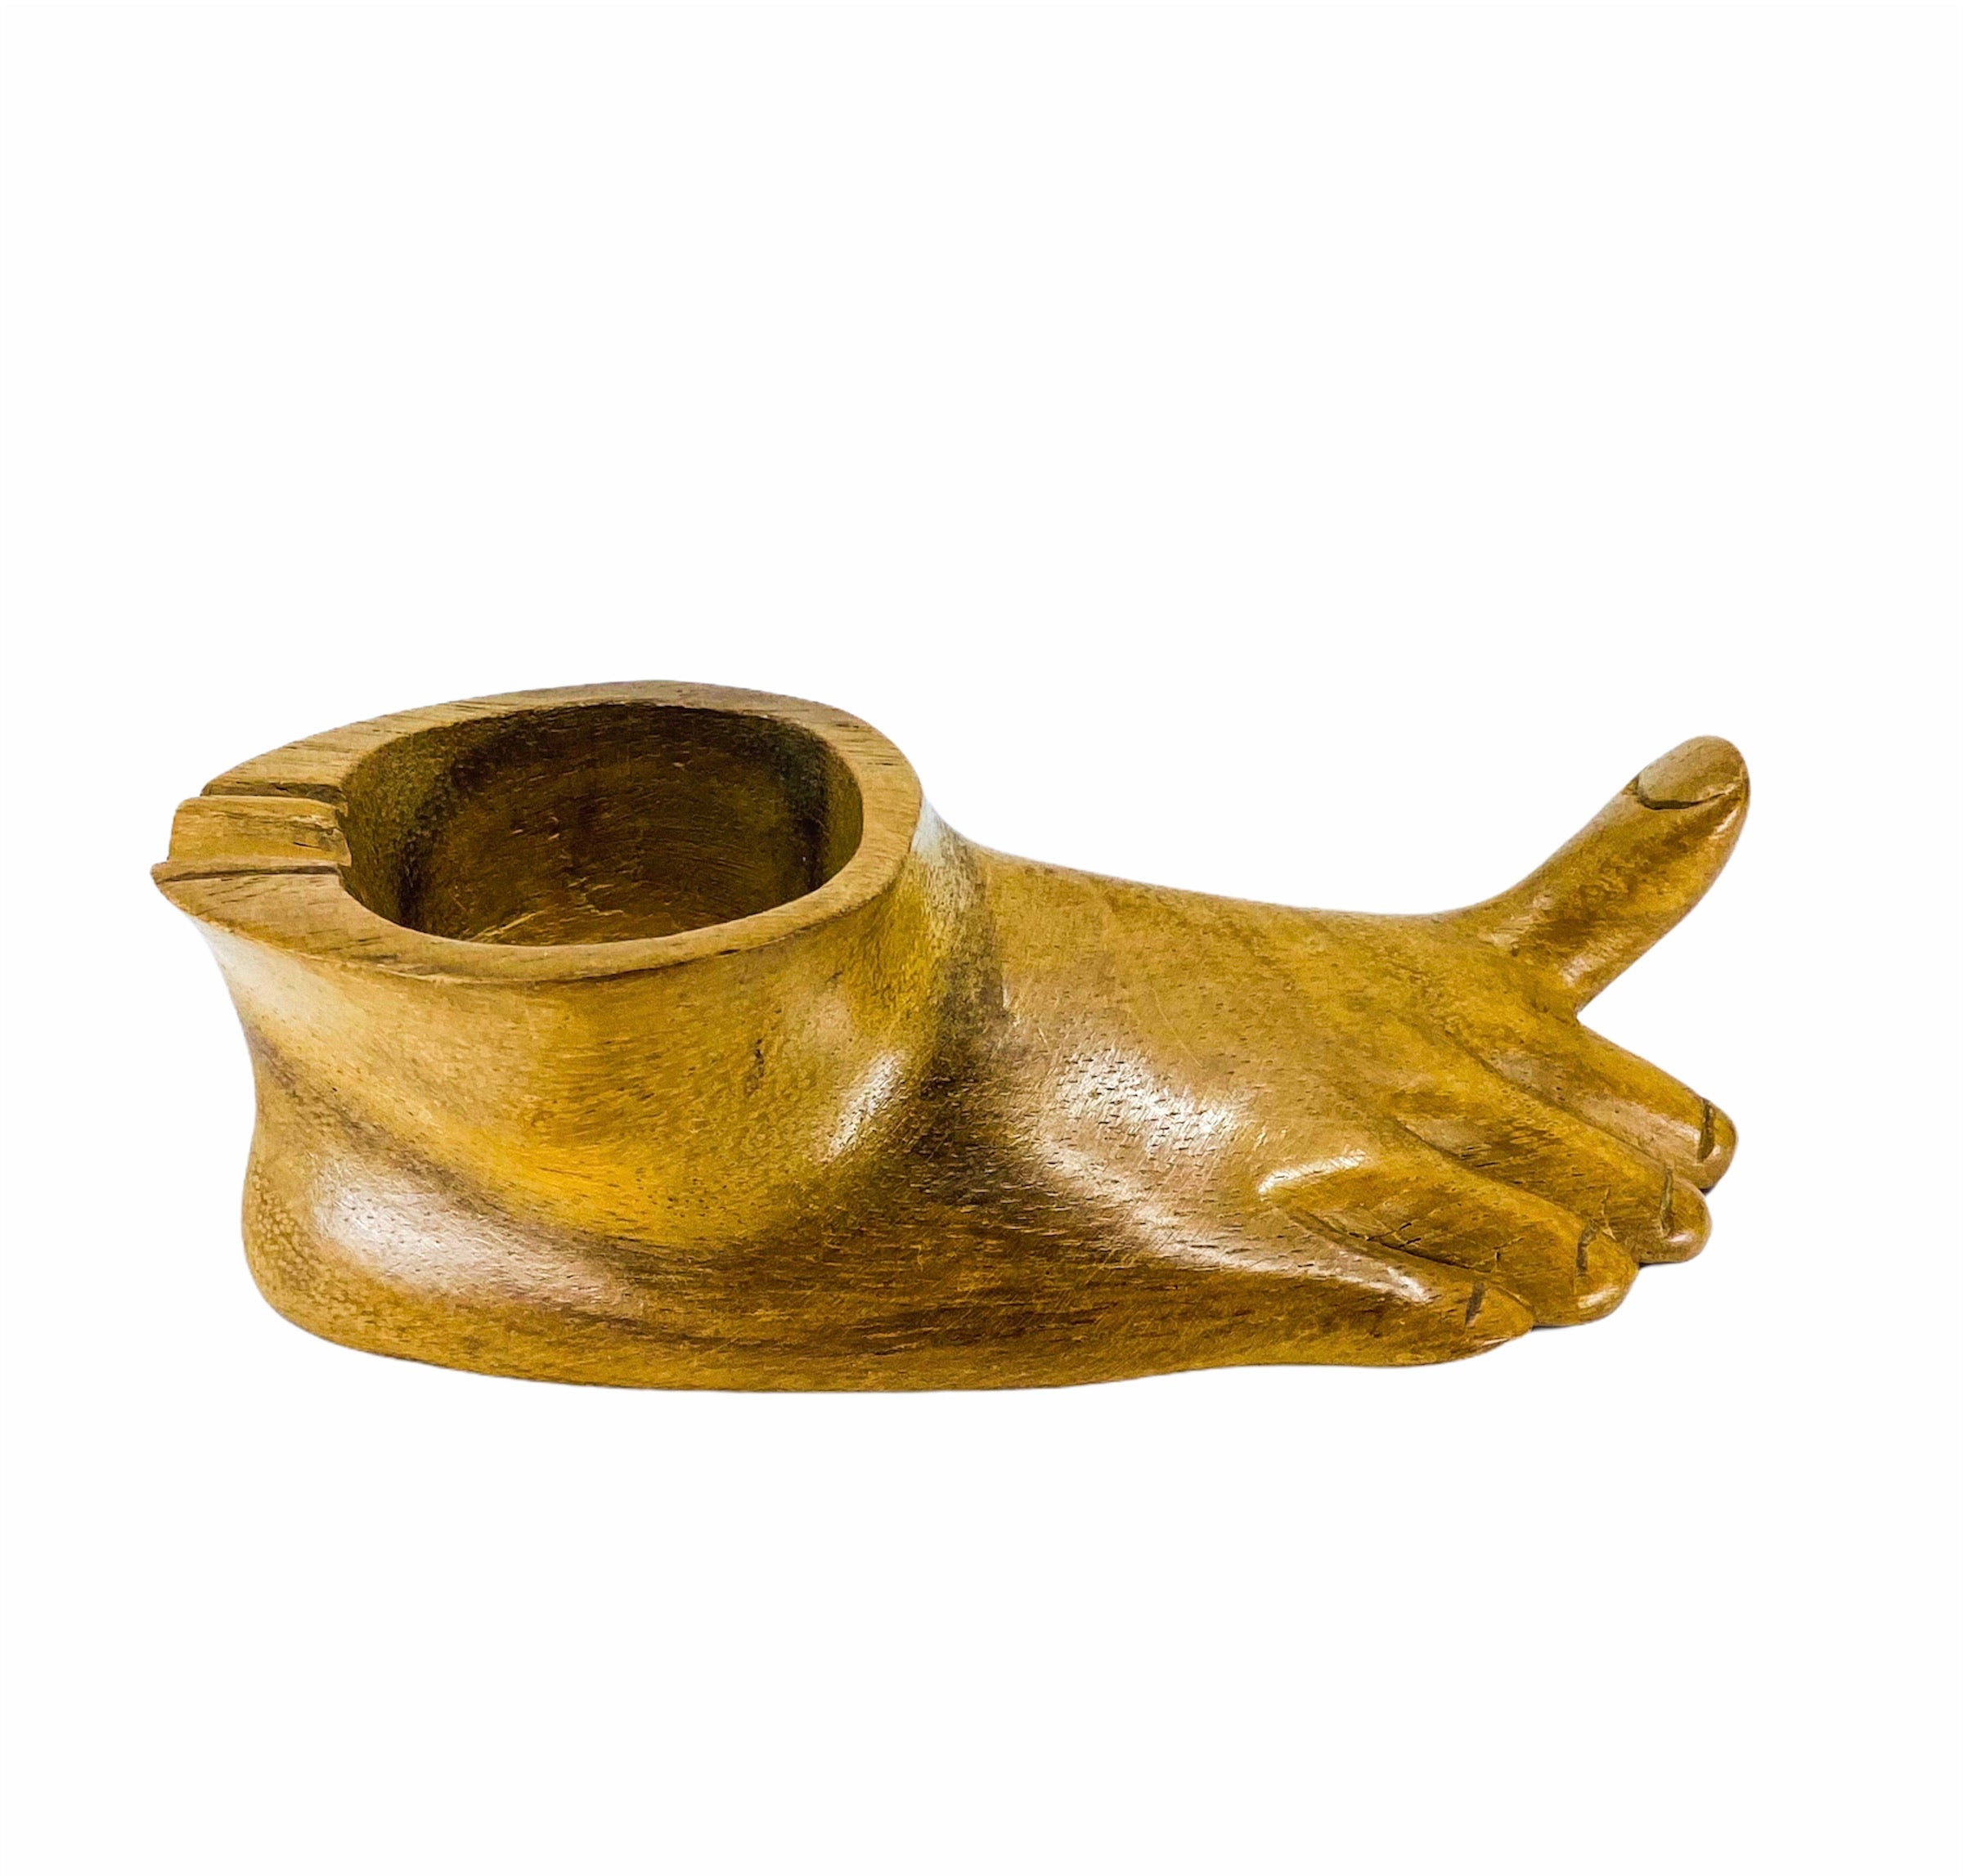 Whimsical Vintage Carved Wood Foot Ashtray, 2 Available